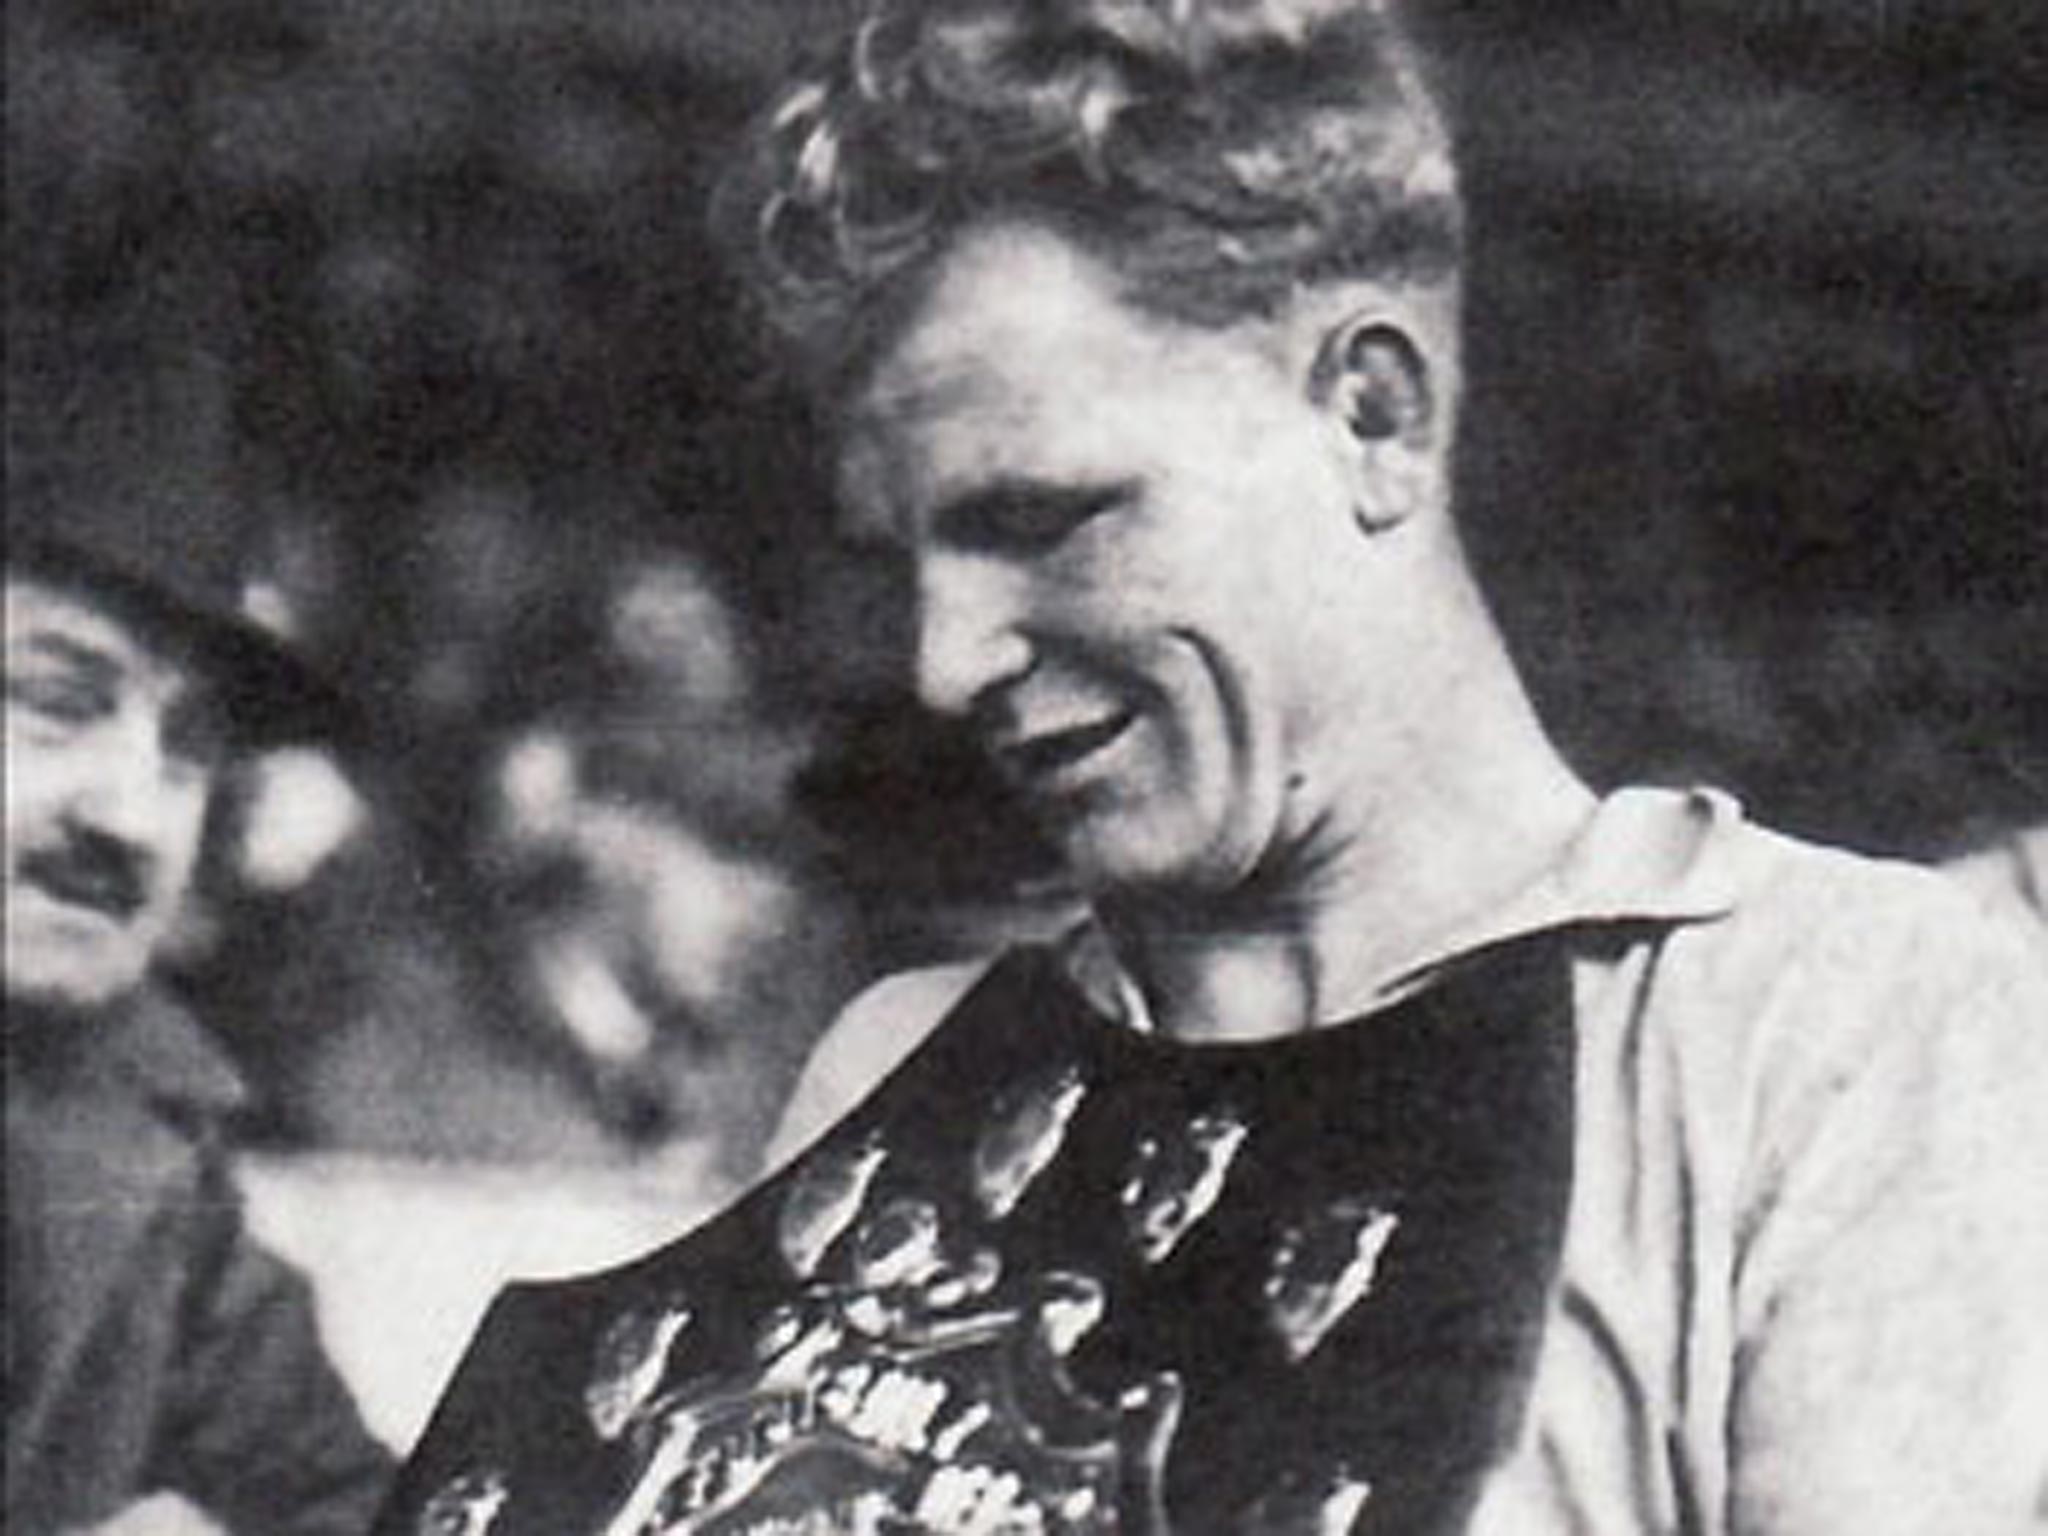 Fred Stansfield takes the trophy for Cardiff City’s Third Division
(South) title in 1947